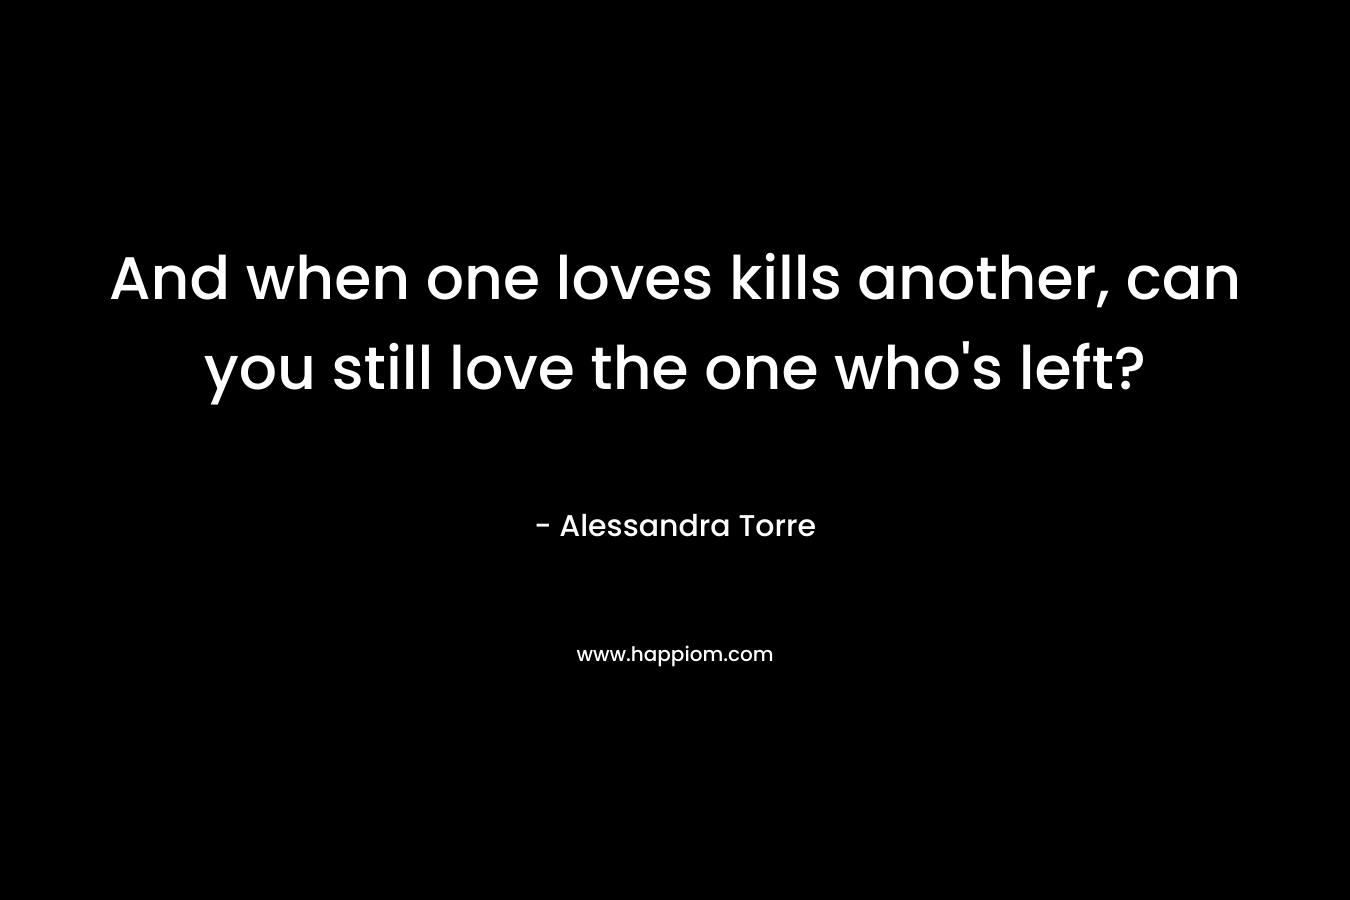 And when one loves kills another, can you still love the one who's left?